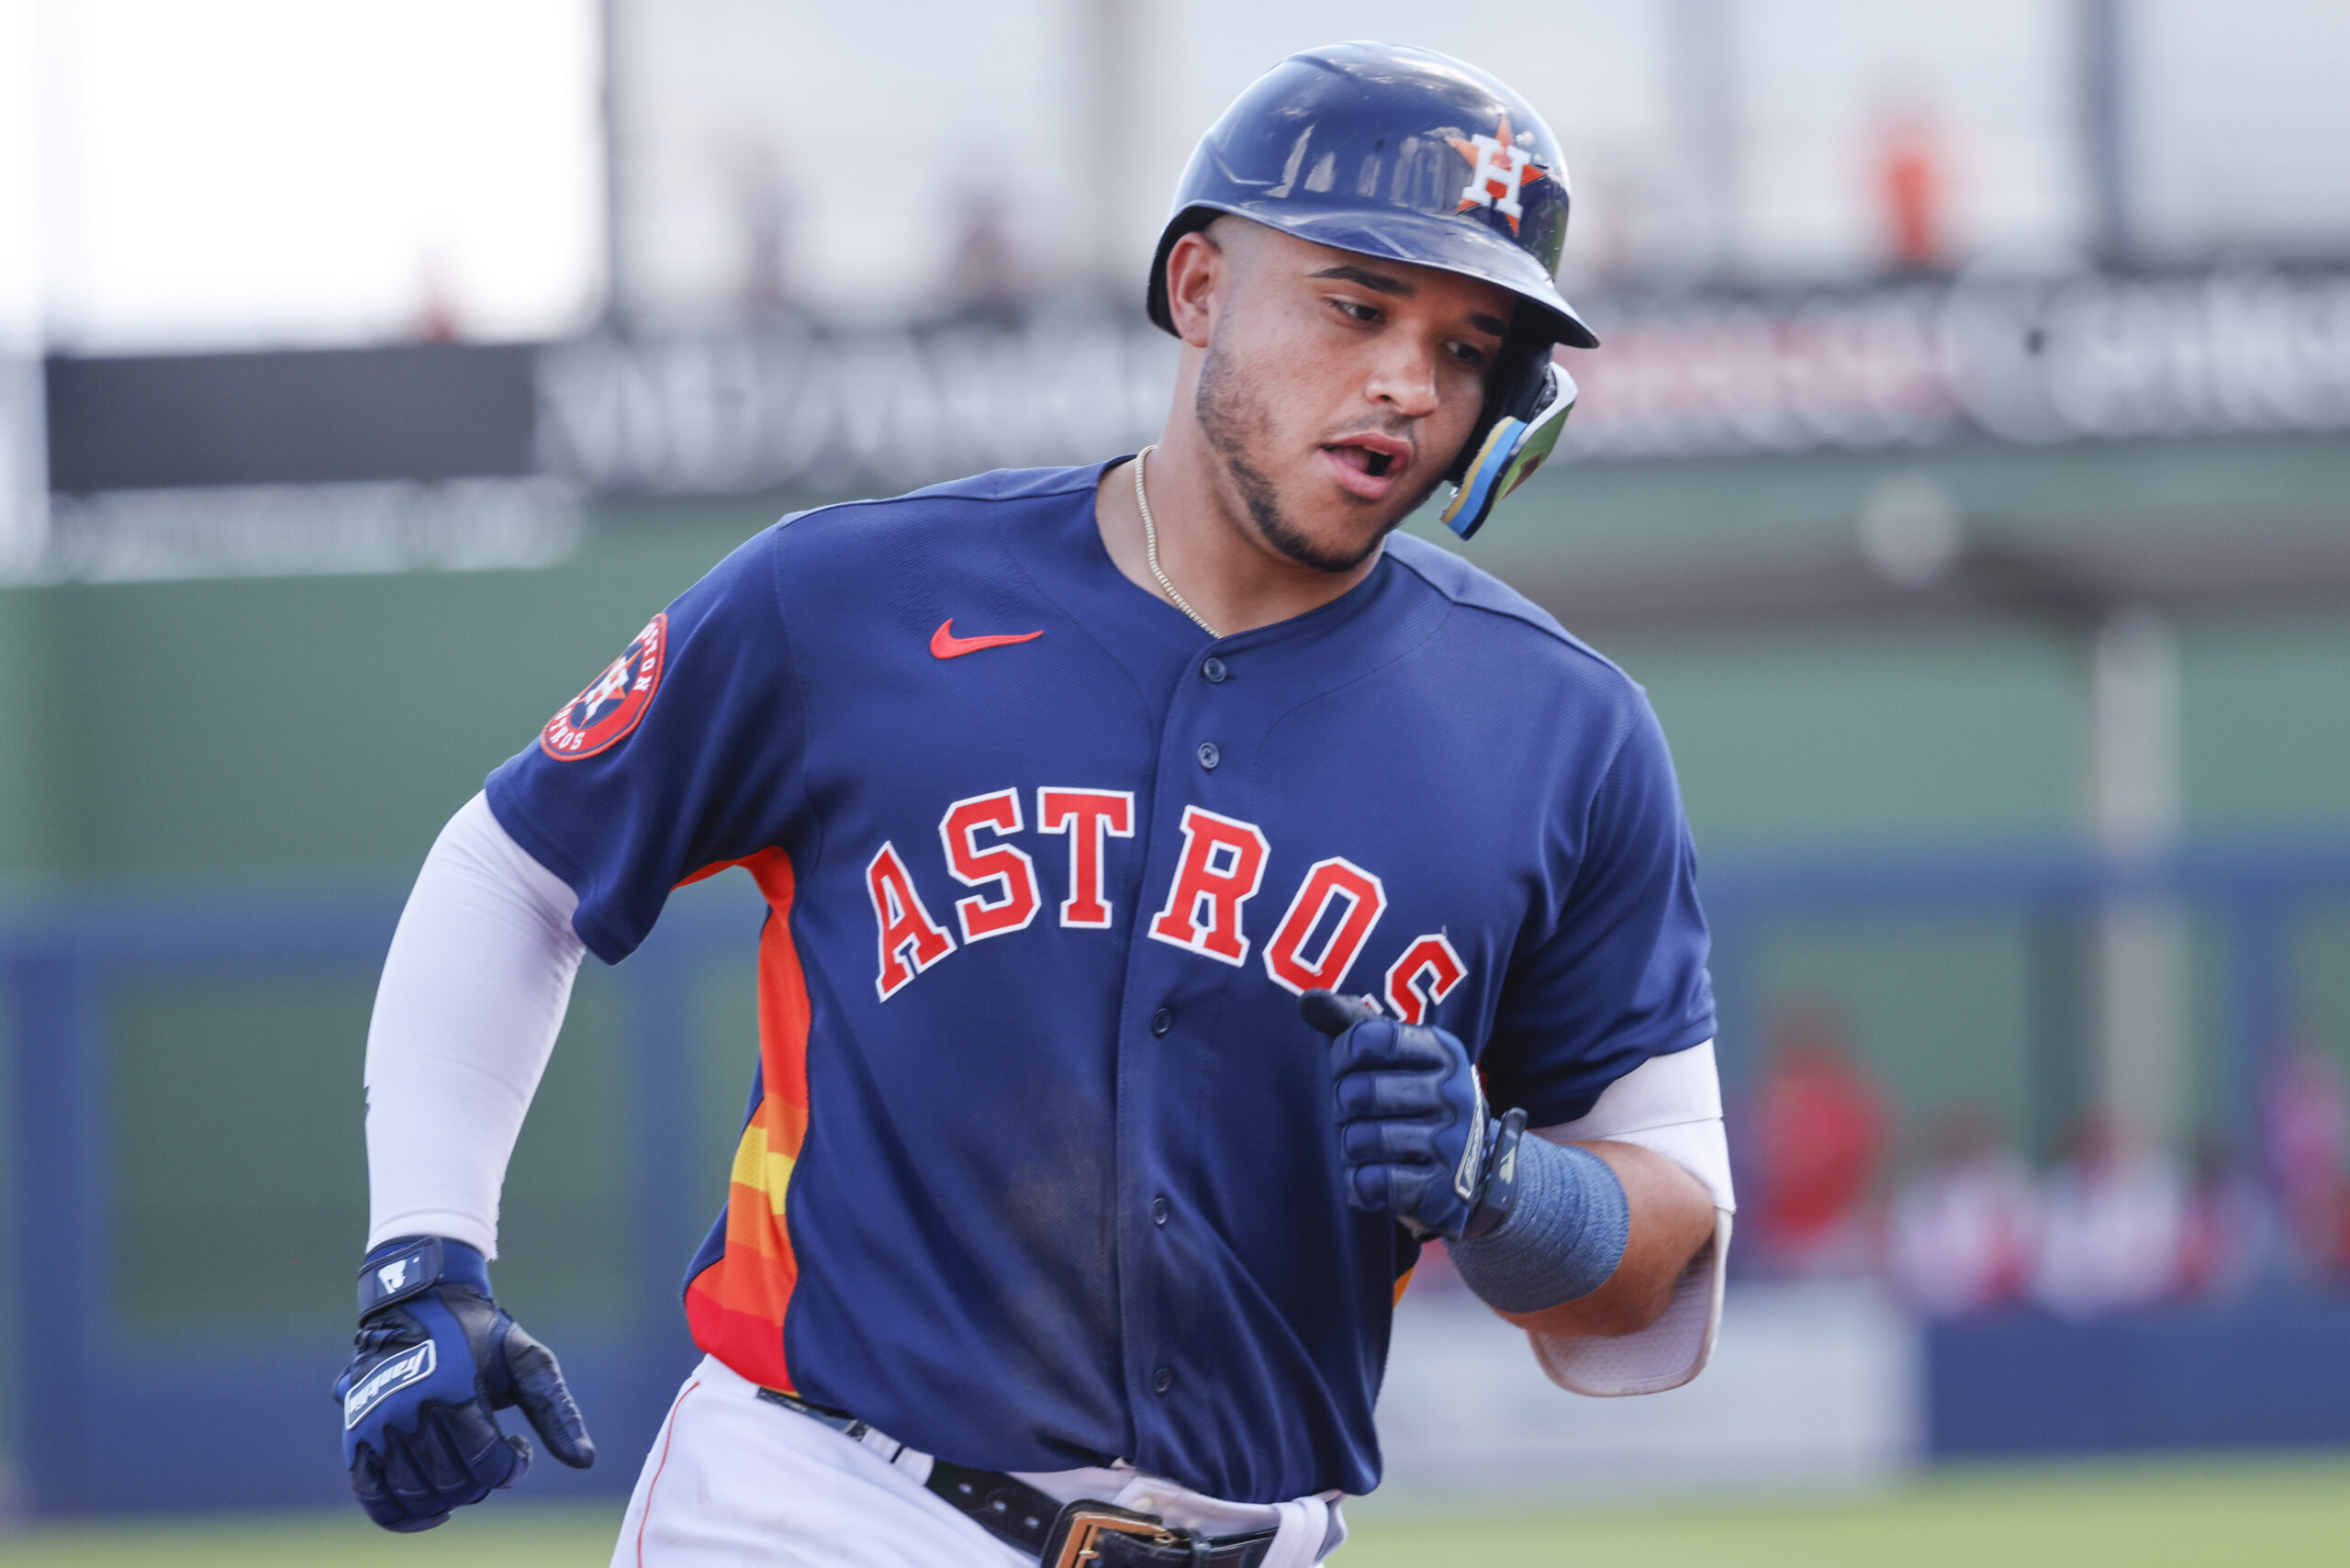 Astros Players Are Getting Hit by Pitches in Spring Training